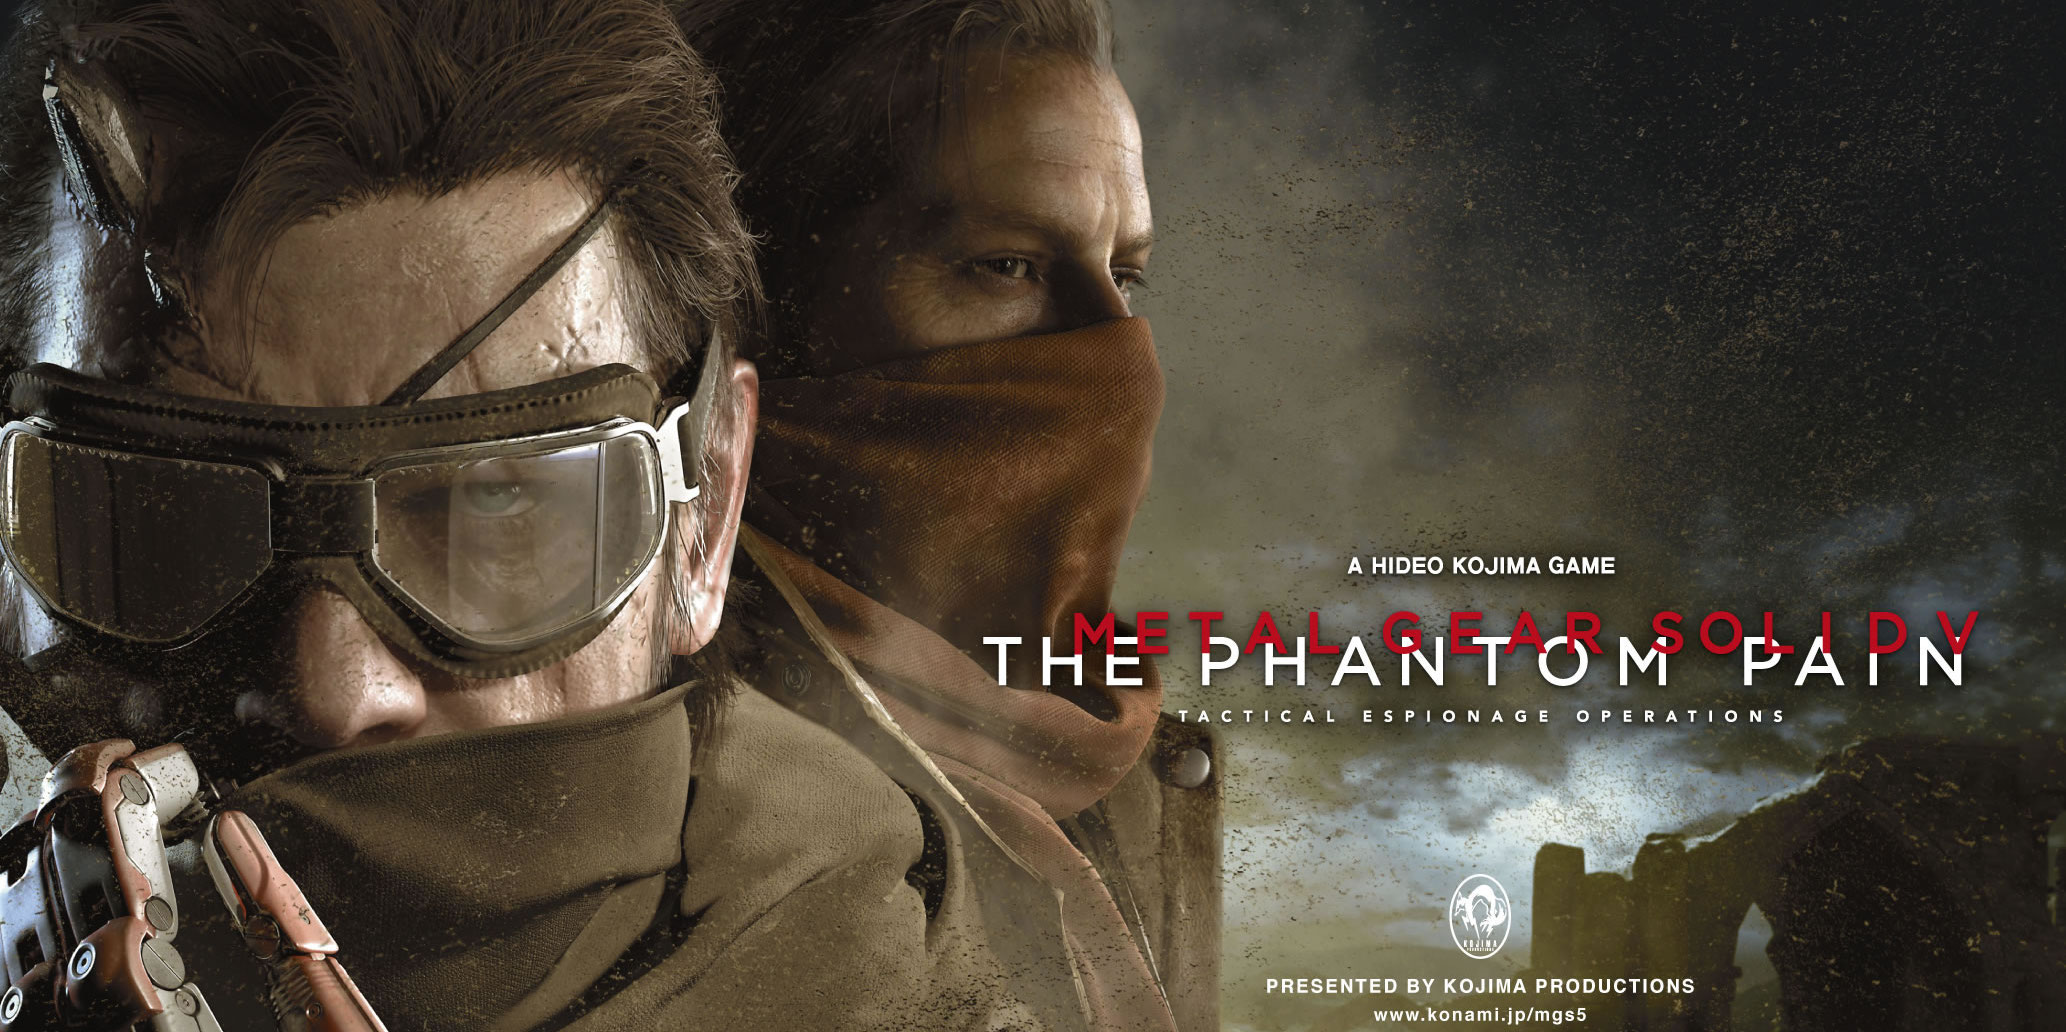 Play Metal Gear Solid V Phantom Pain on PS4 for free Plus